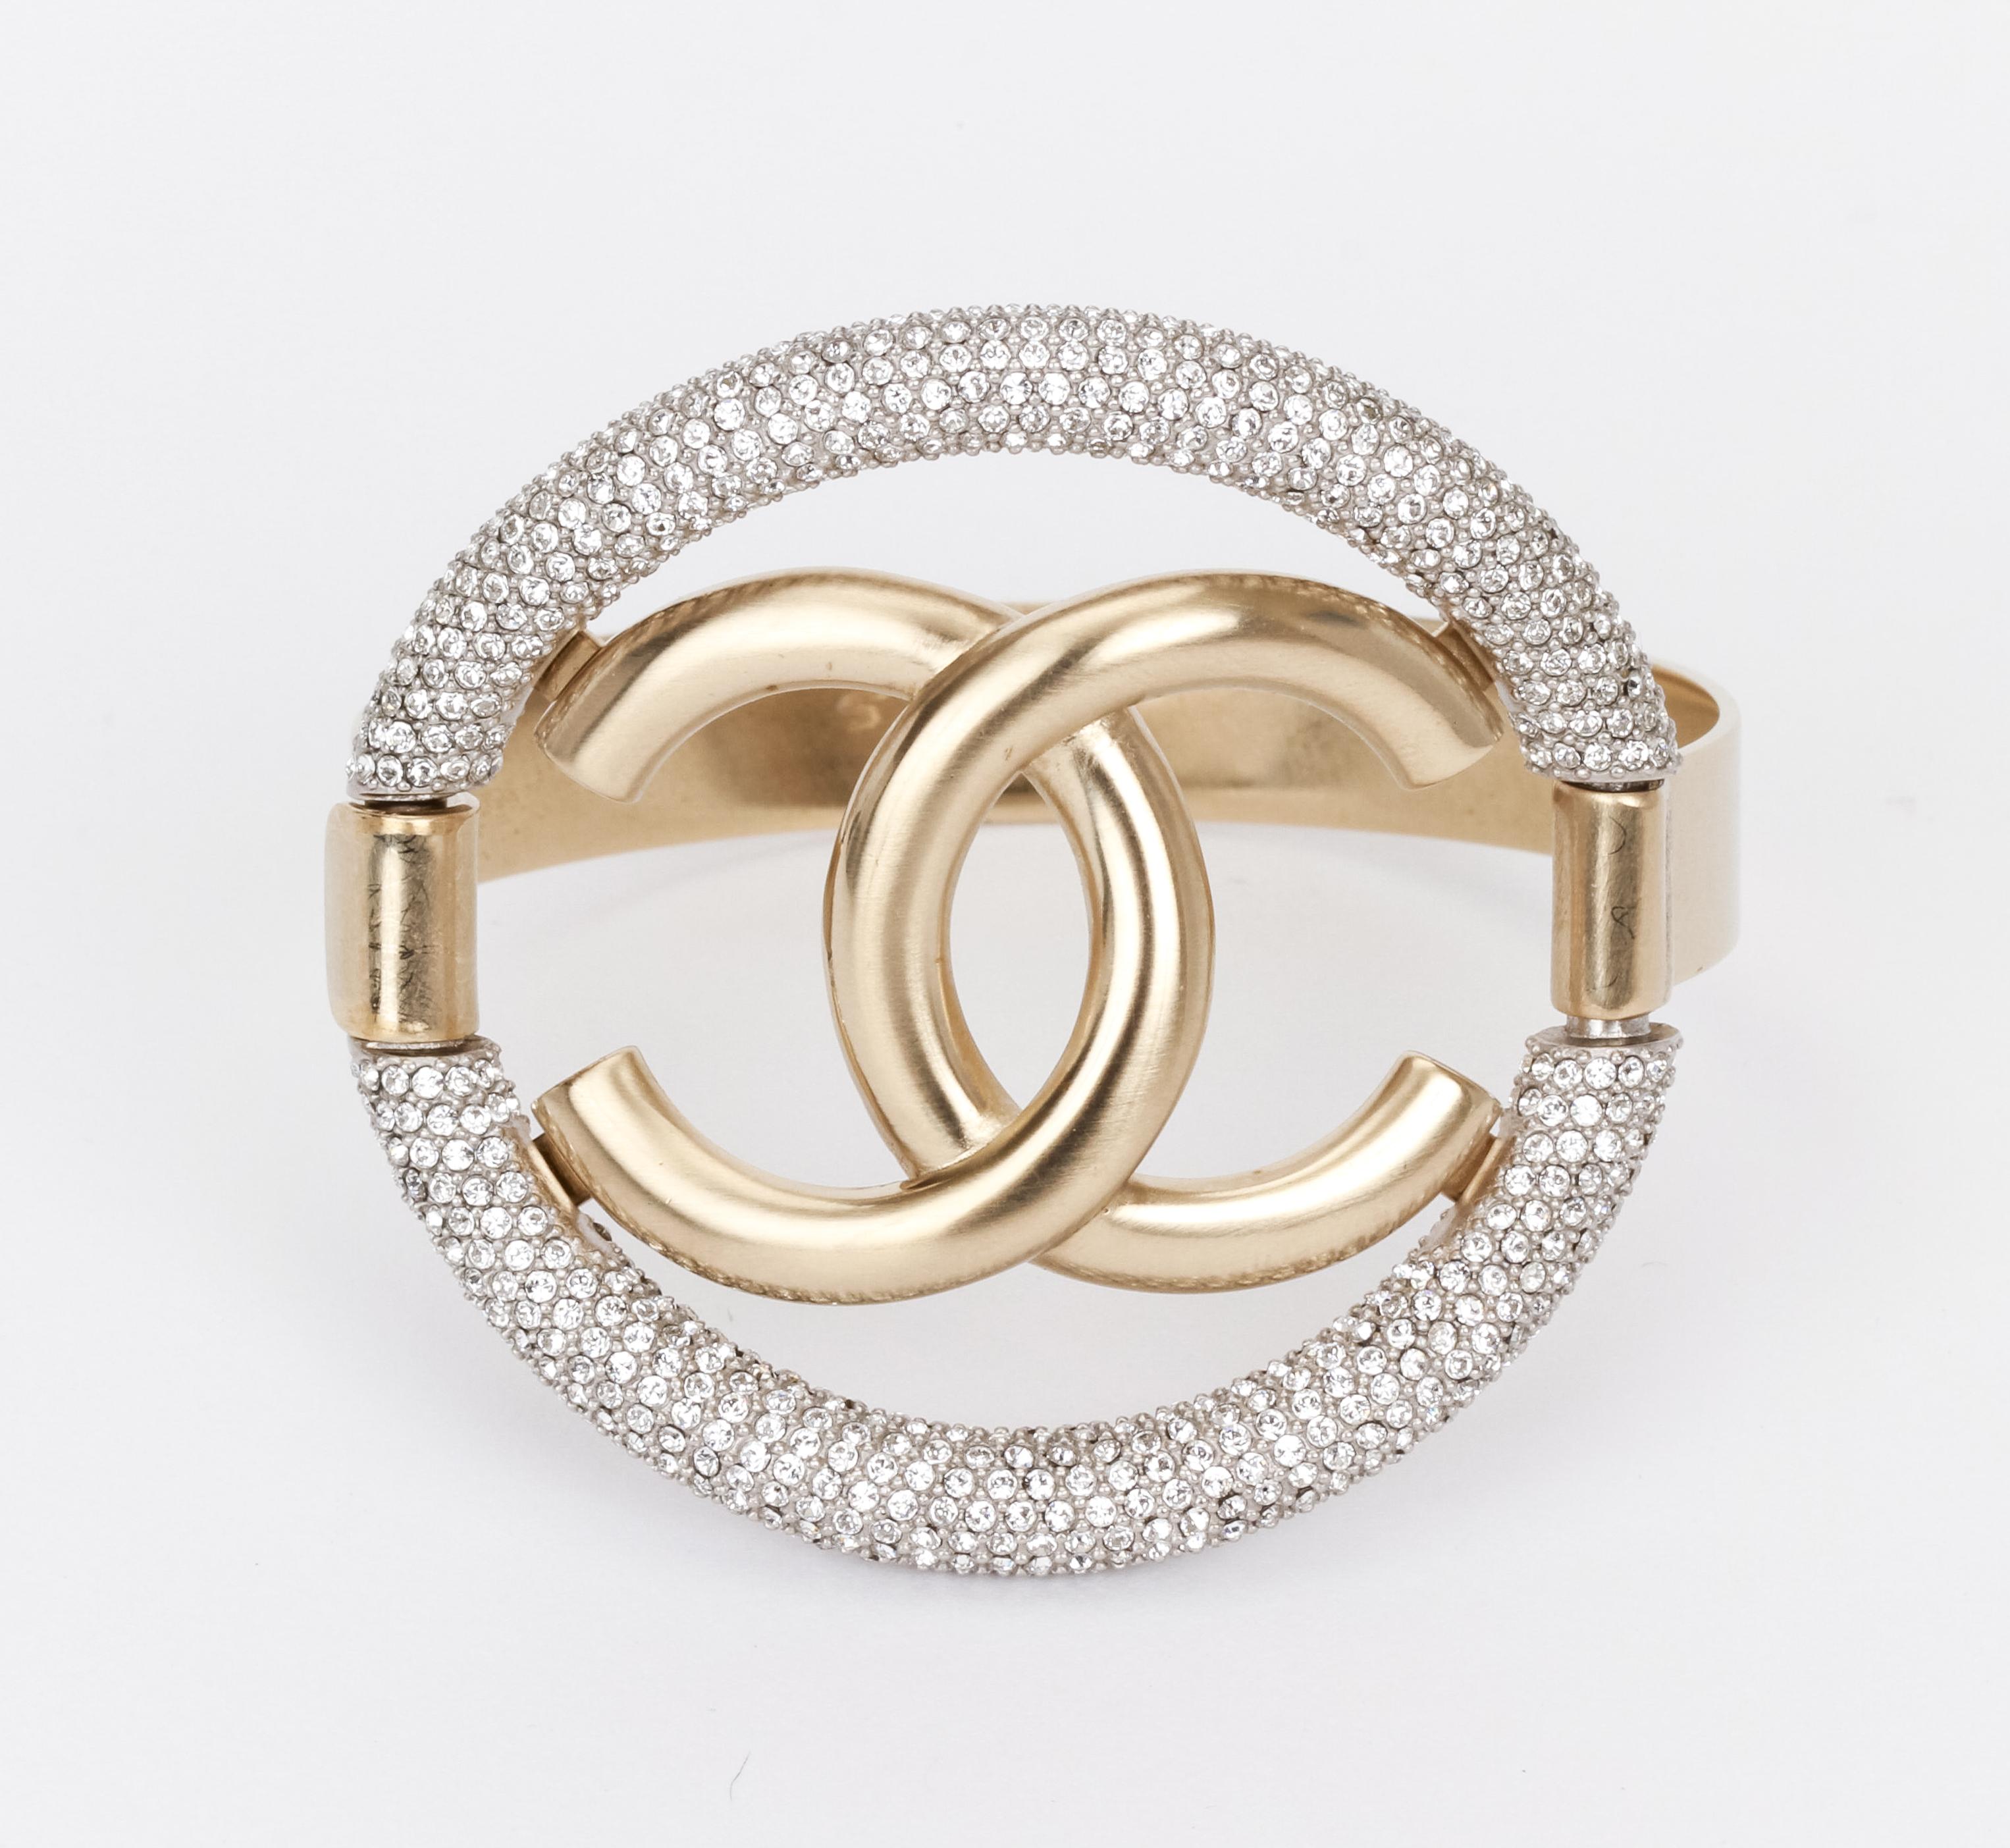 Stunning Chanel bracelet in light gold with interlocking CC logo surrounded in a circle of sparkling rhinestones. Comes with original pouch.